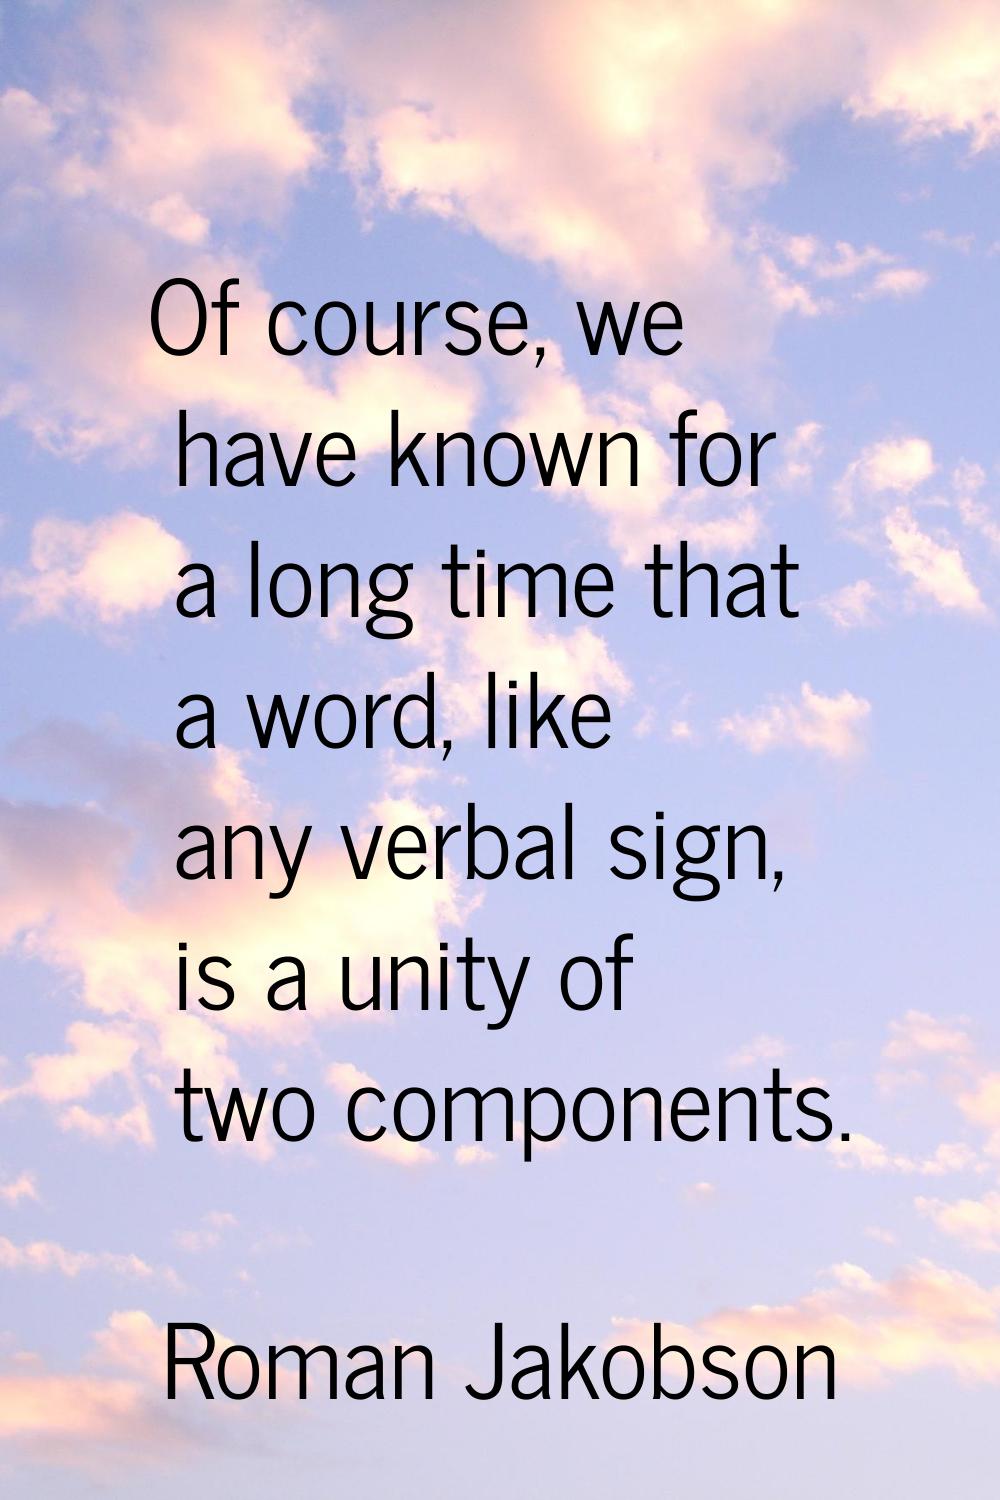 Of course, we have known for a long time that a word, like any verbal sign, is a unity of two compo